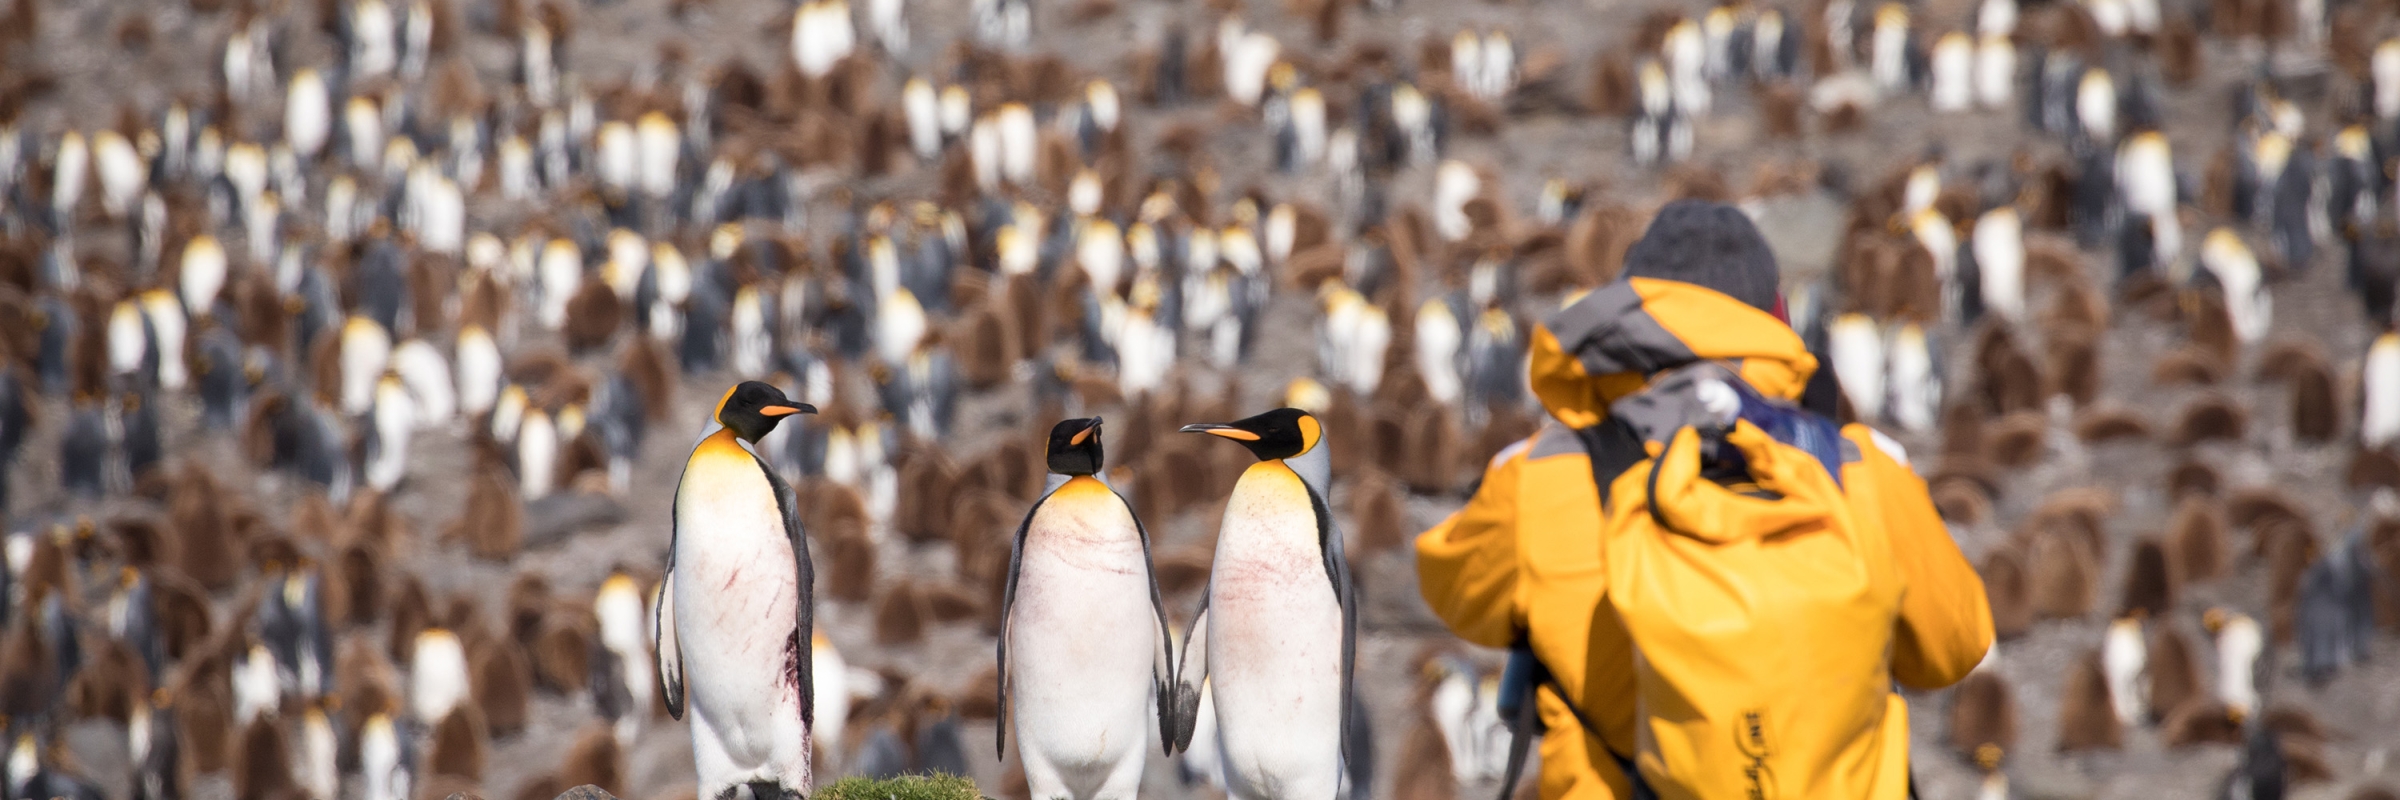 A guest photographing King penguins at St Andrews Bay, South Georgia. Photo: Acacia Johnson